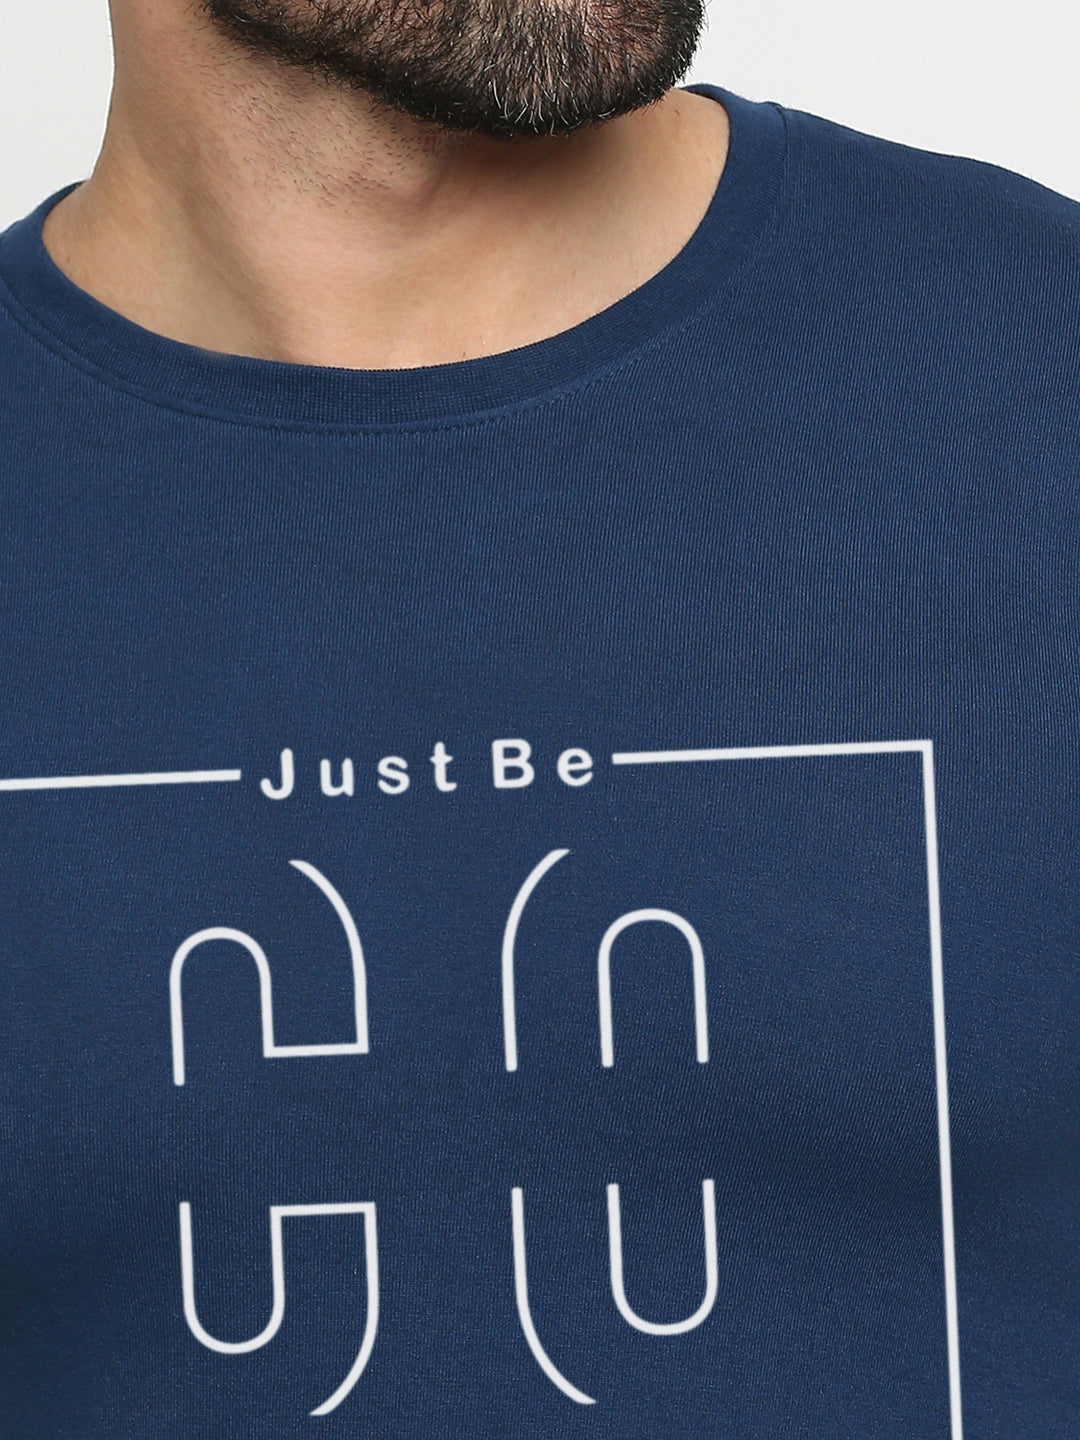 Just Be Cool T-Shirt